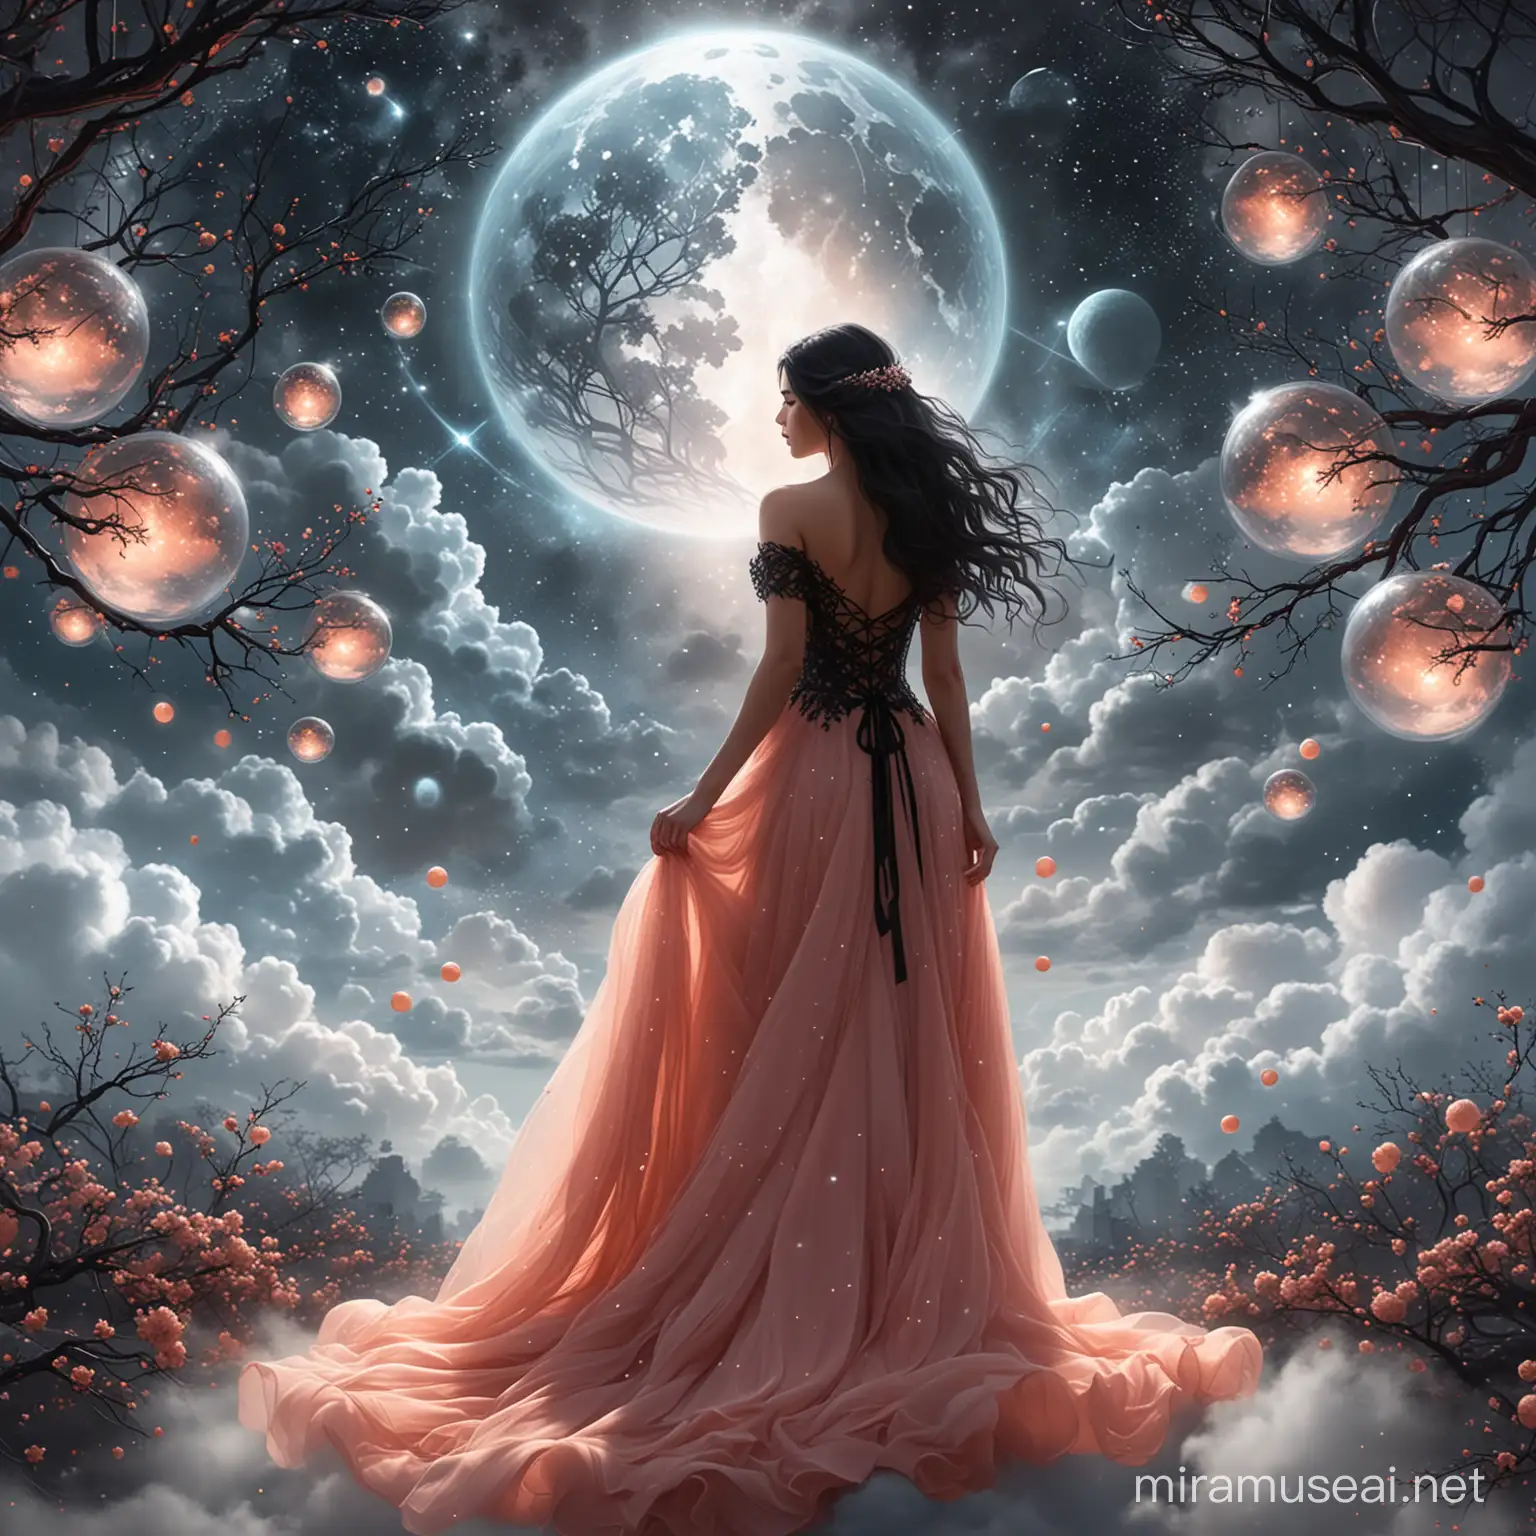 A beautiful woman, from behind, walking in the cloud sky, in front of a big transparent balls with branches inside. Long wavy black hair. Elegant long salmon and black wedding dress, haute couture. Background nebula sky. Background constellation map. Background flowers. 8k, fantasy, illustration, digital art, illustration art, fantasy art, fantasy style